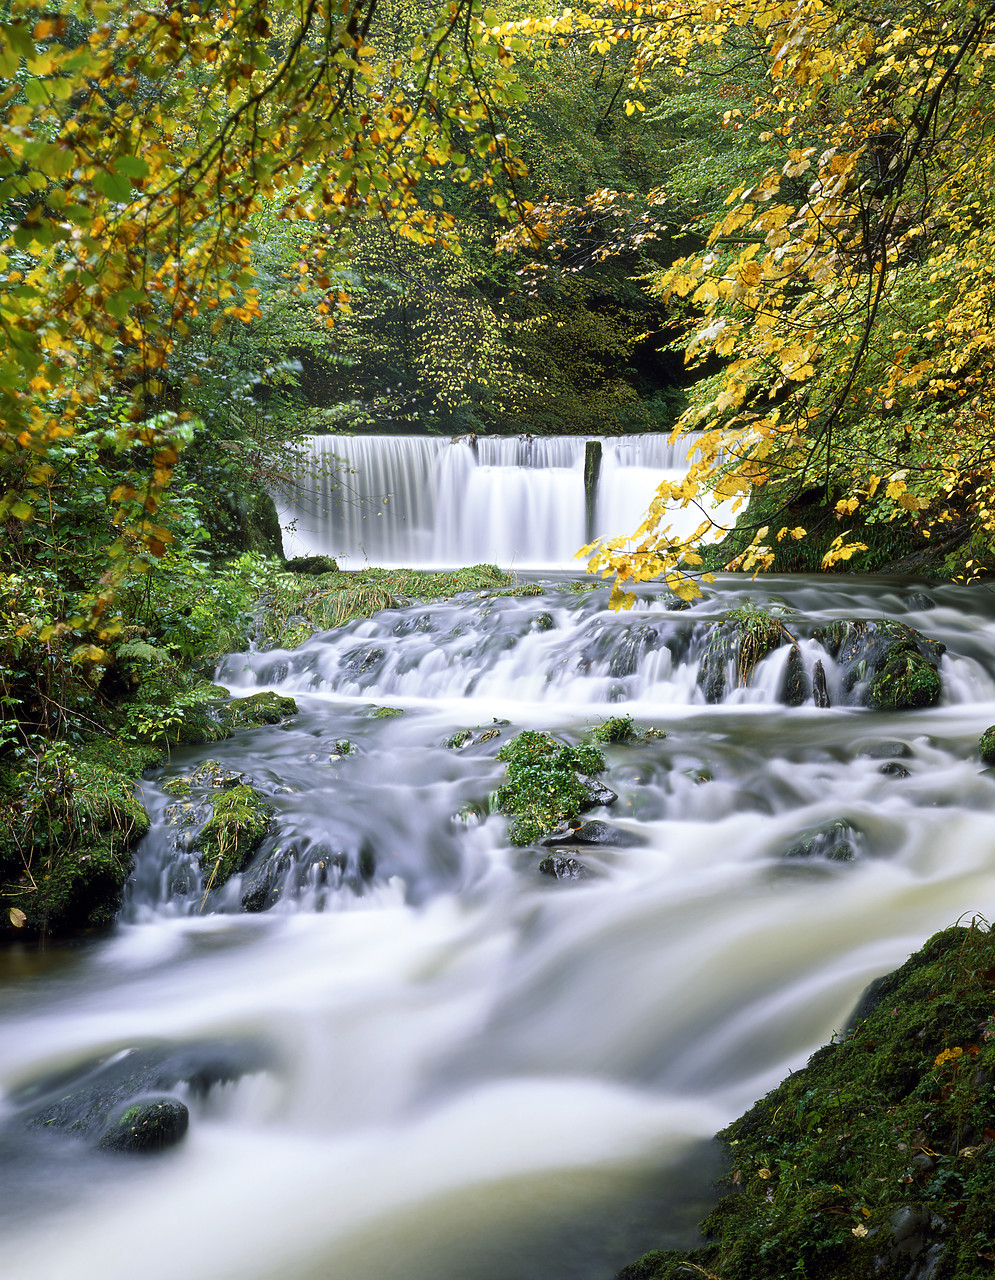 #020763-11 - River Stock in Autumn, Ableside, Lake District National Park, Cumbria, England